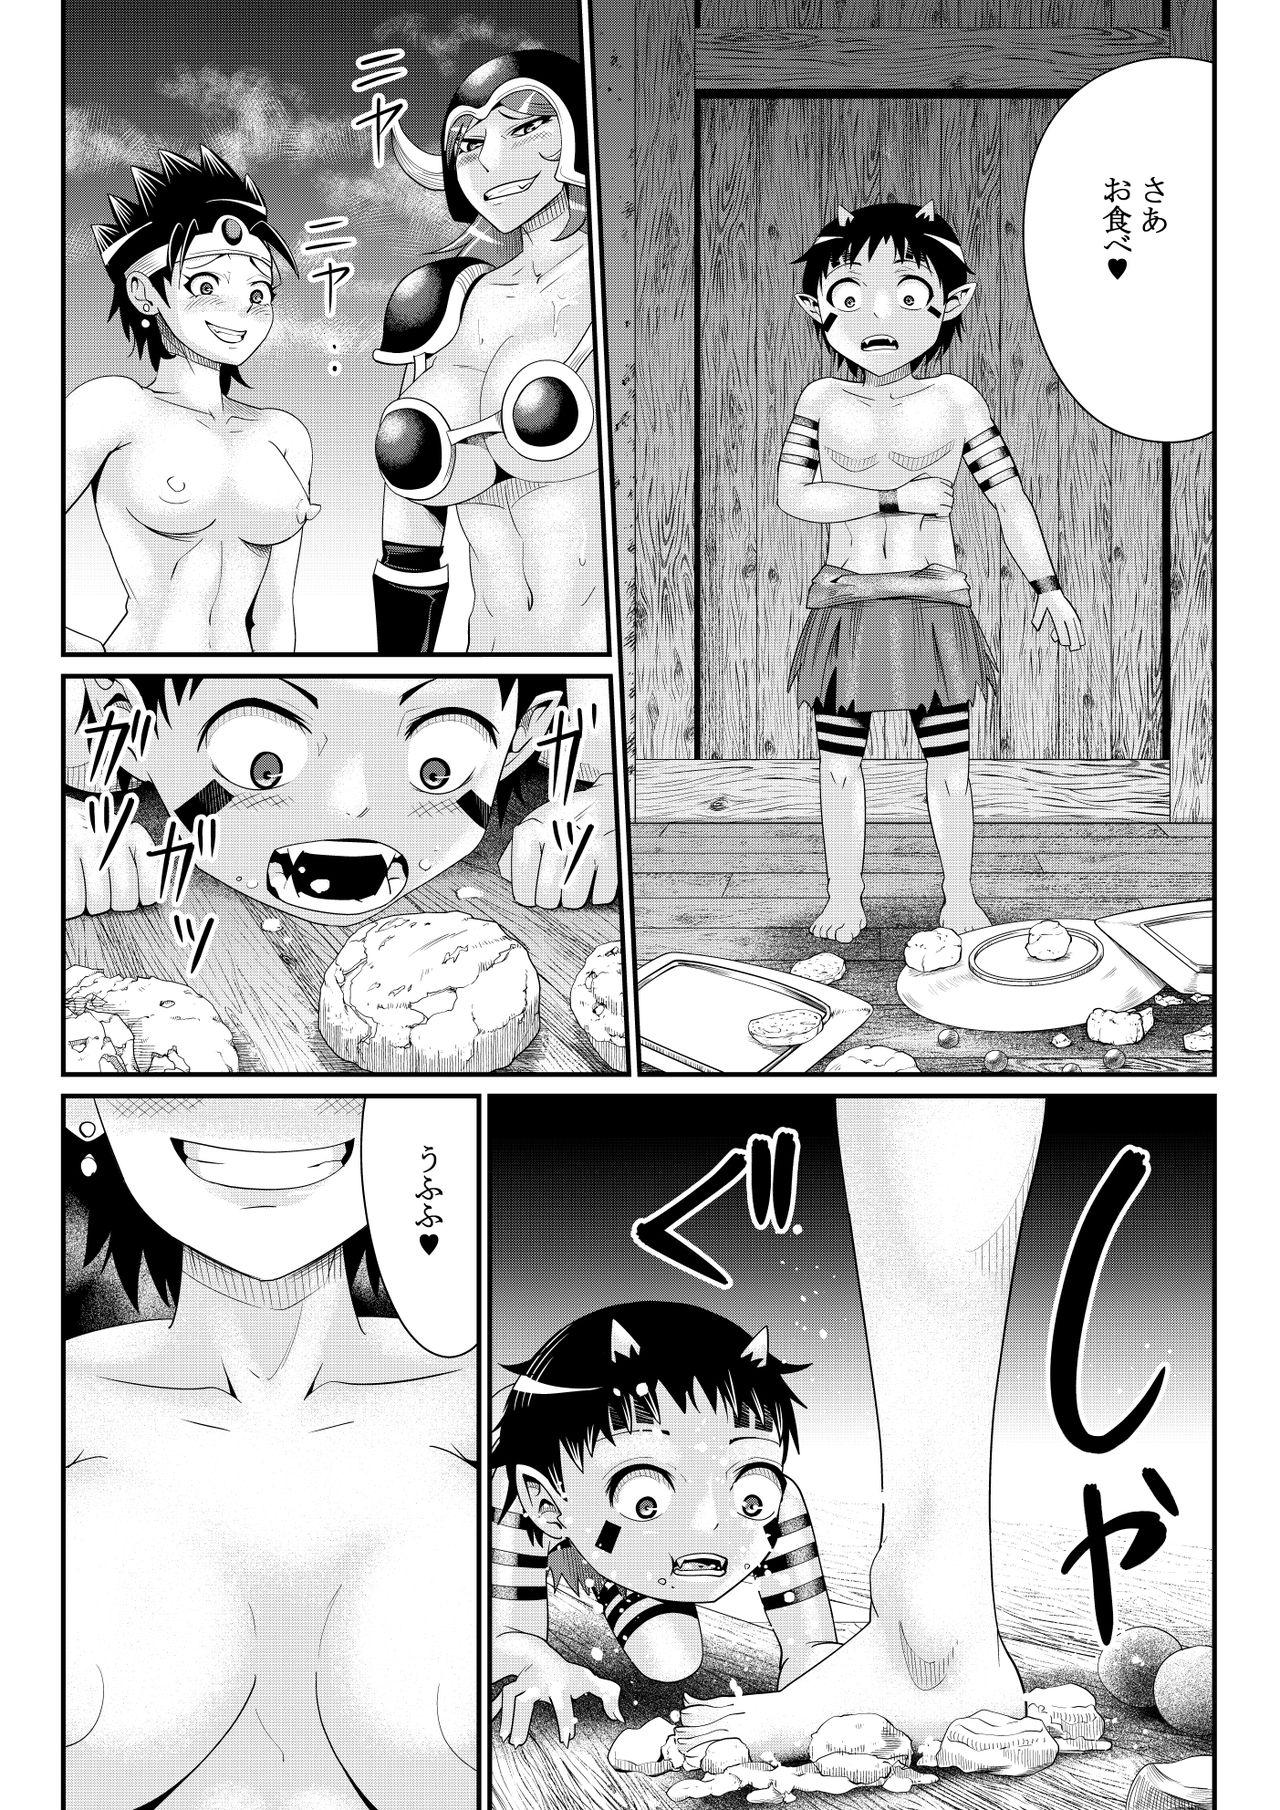 Exhibition Female Brave Orc Assault Record - Dragon quest Hot Girl Pussy - Page 10